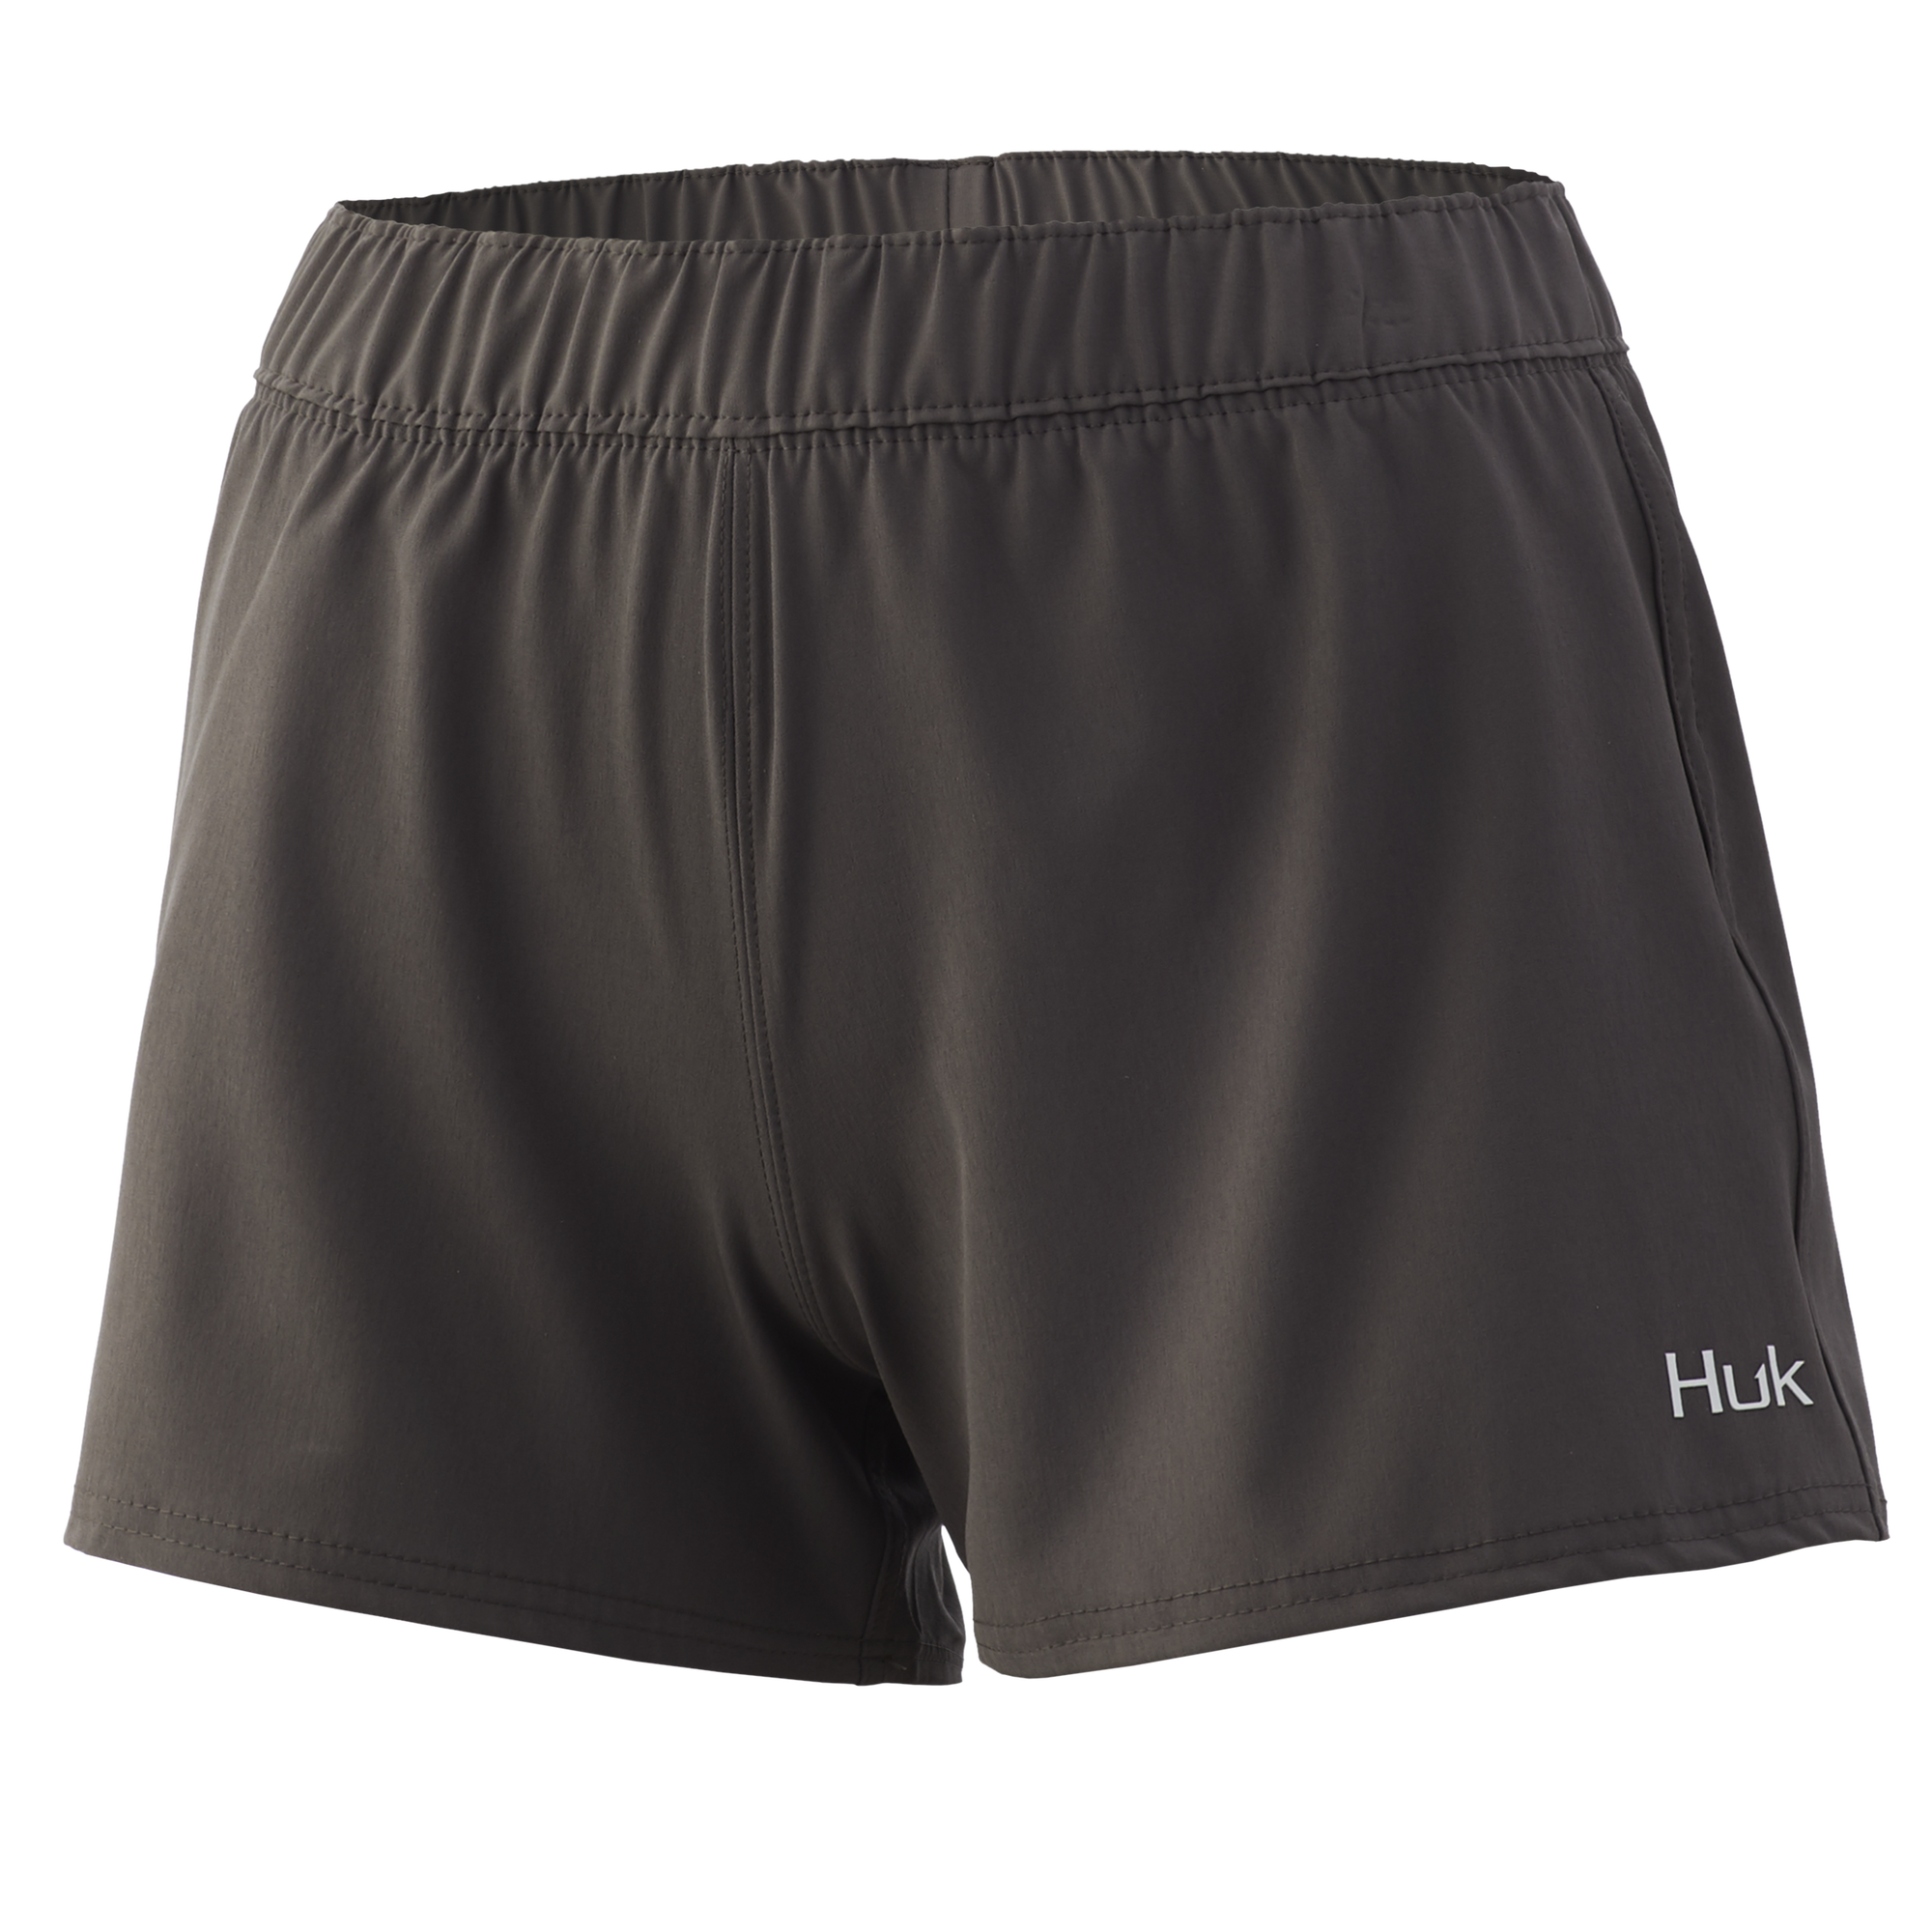 Huk Men's Capers Volley 5.5 Black Small Performance Fishing and Swim Shorts  